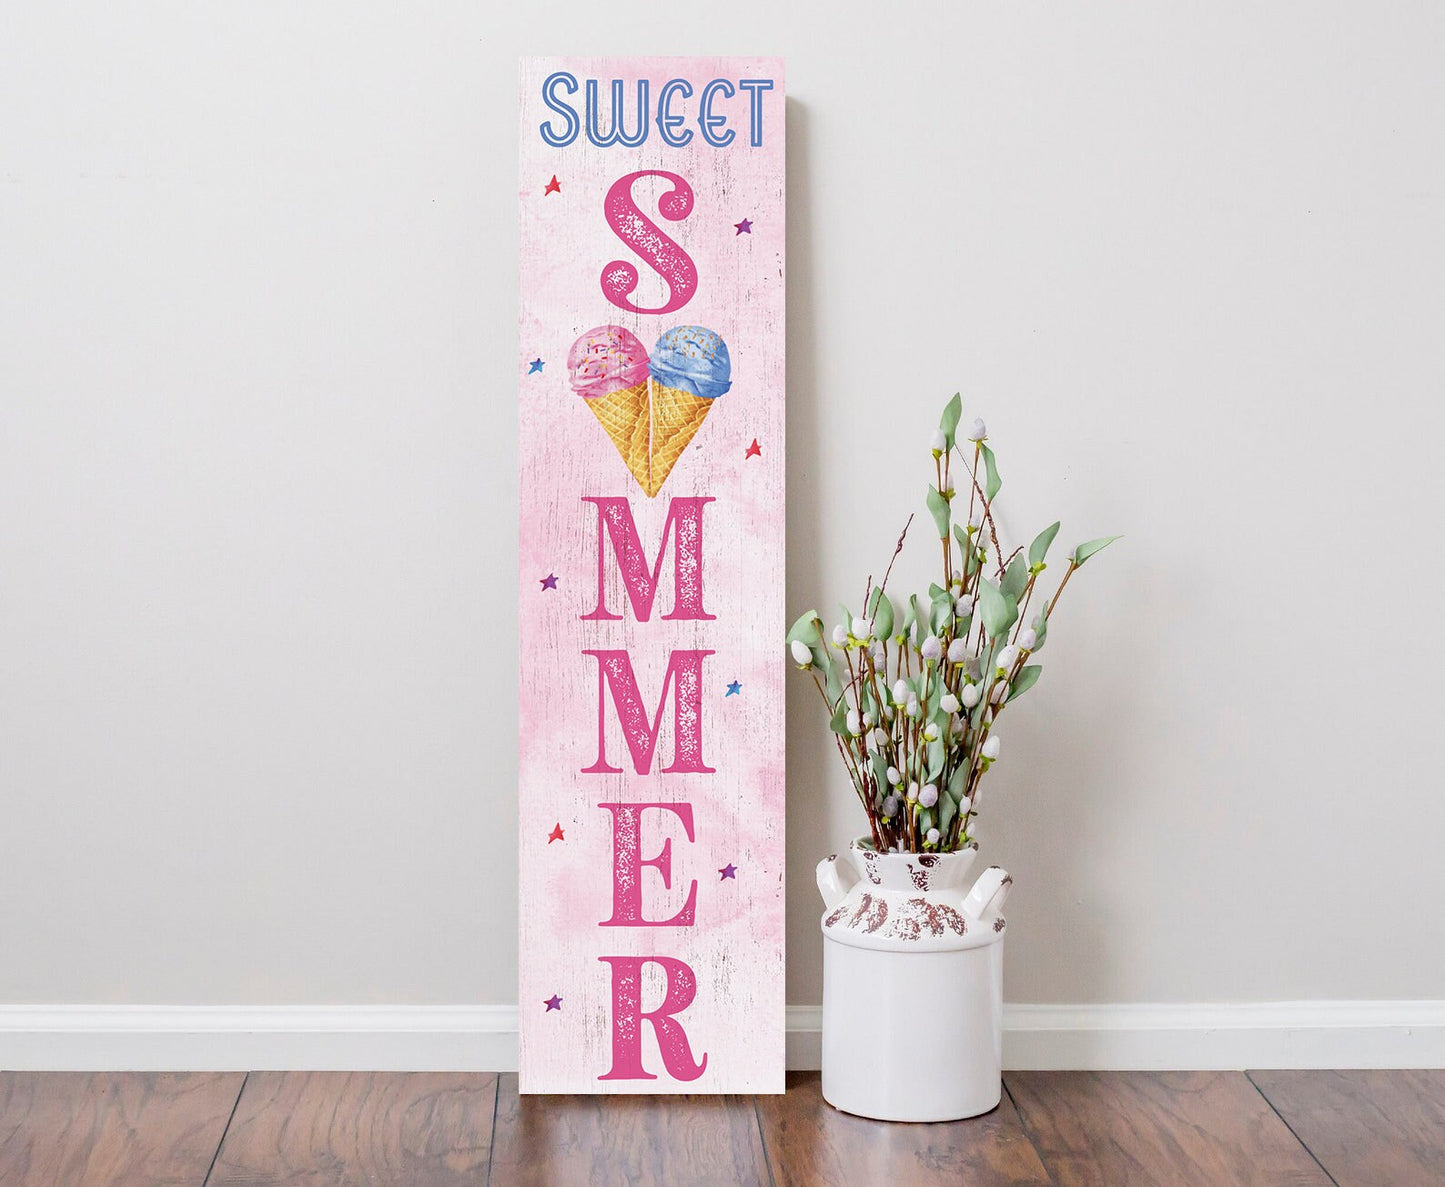 36in Sweet Summer Ice Cream Porch Sign - Wooden Front Door Wall Decor for Home - Fun & Colorful Seasonal Design